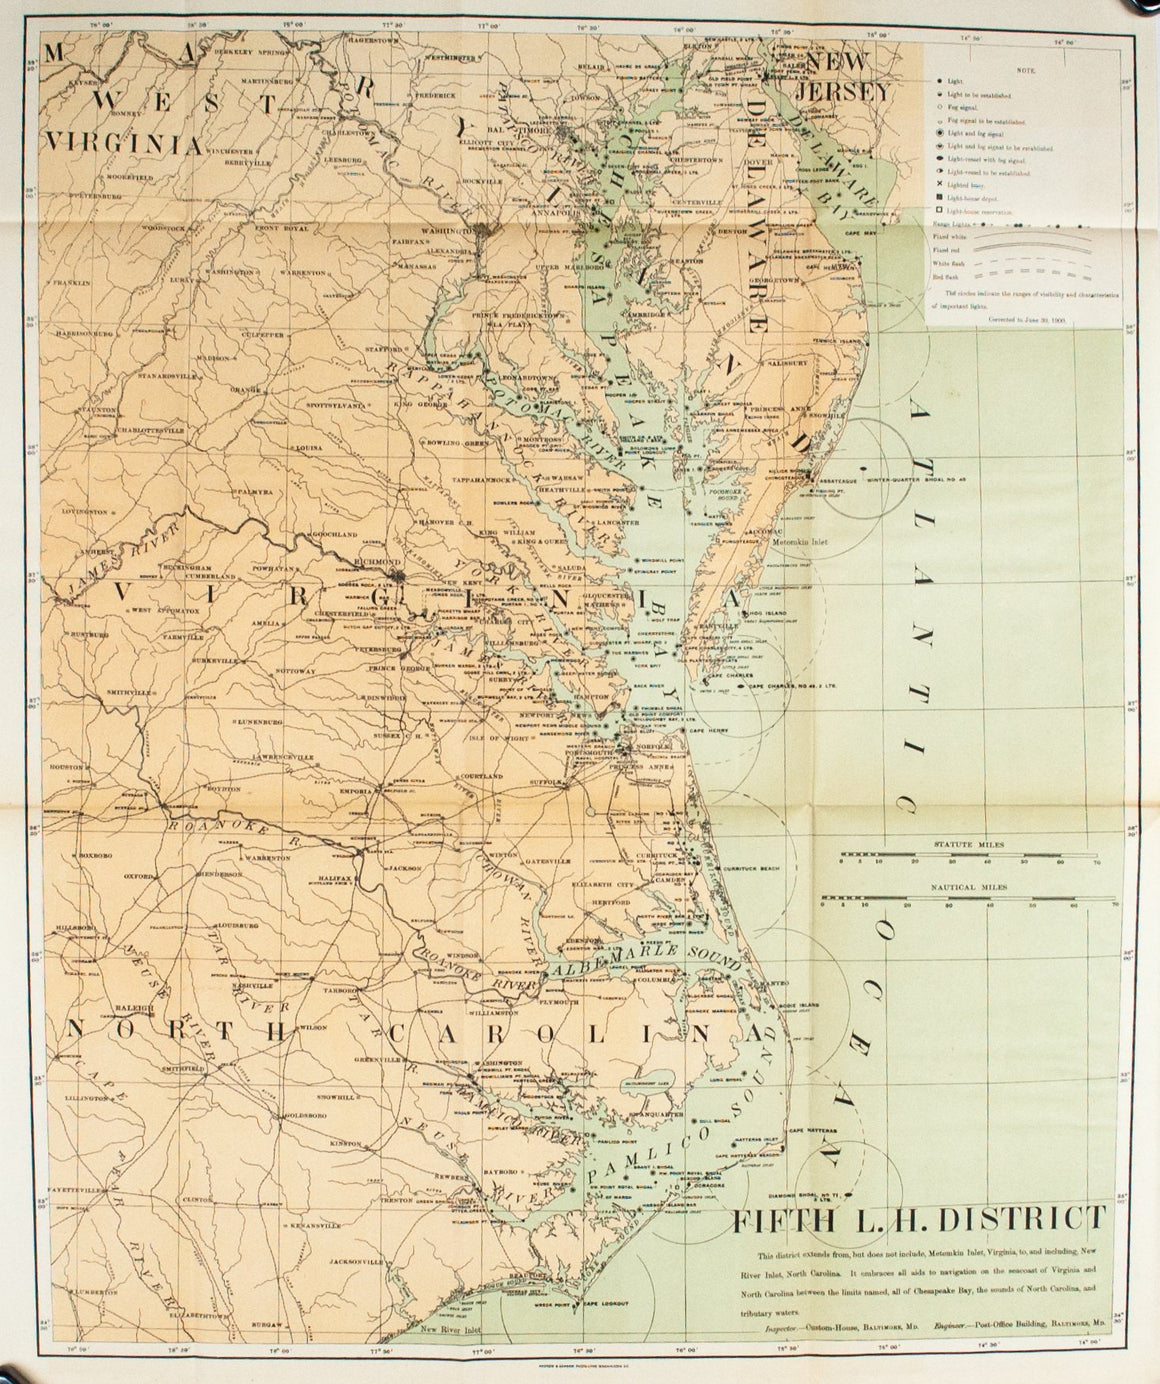 1900 Fifth Lighthouse District - US Light-House Board